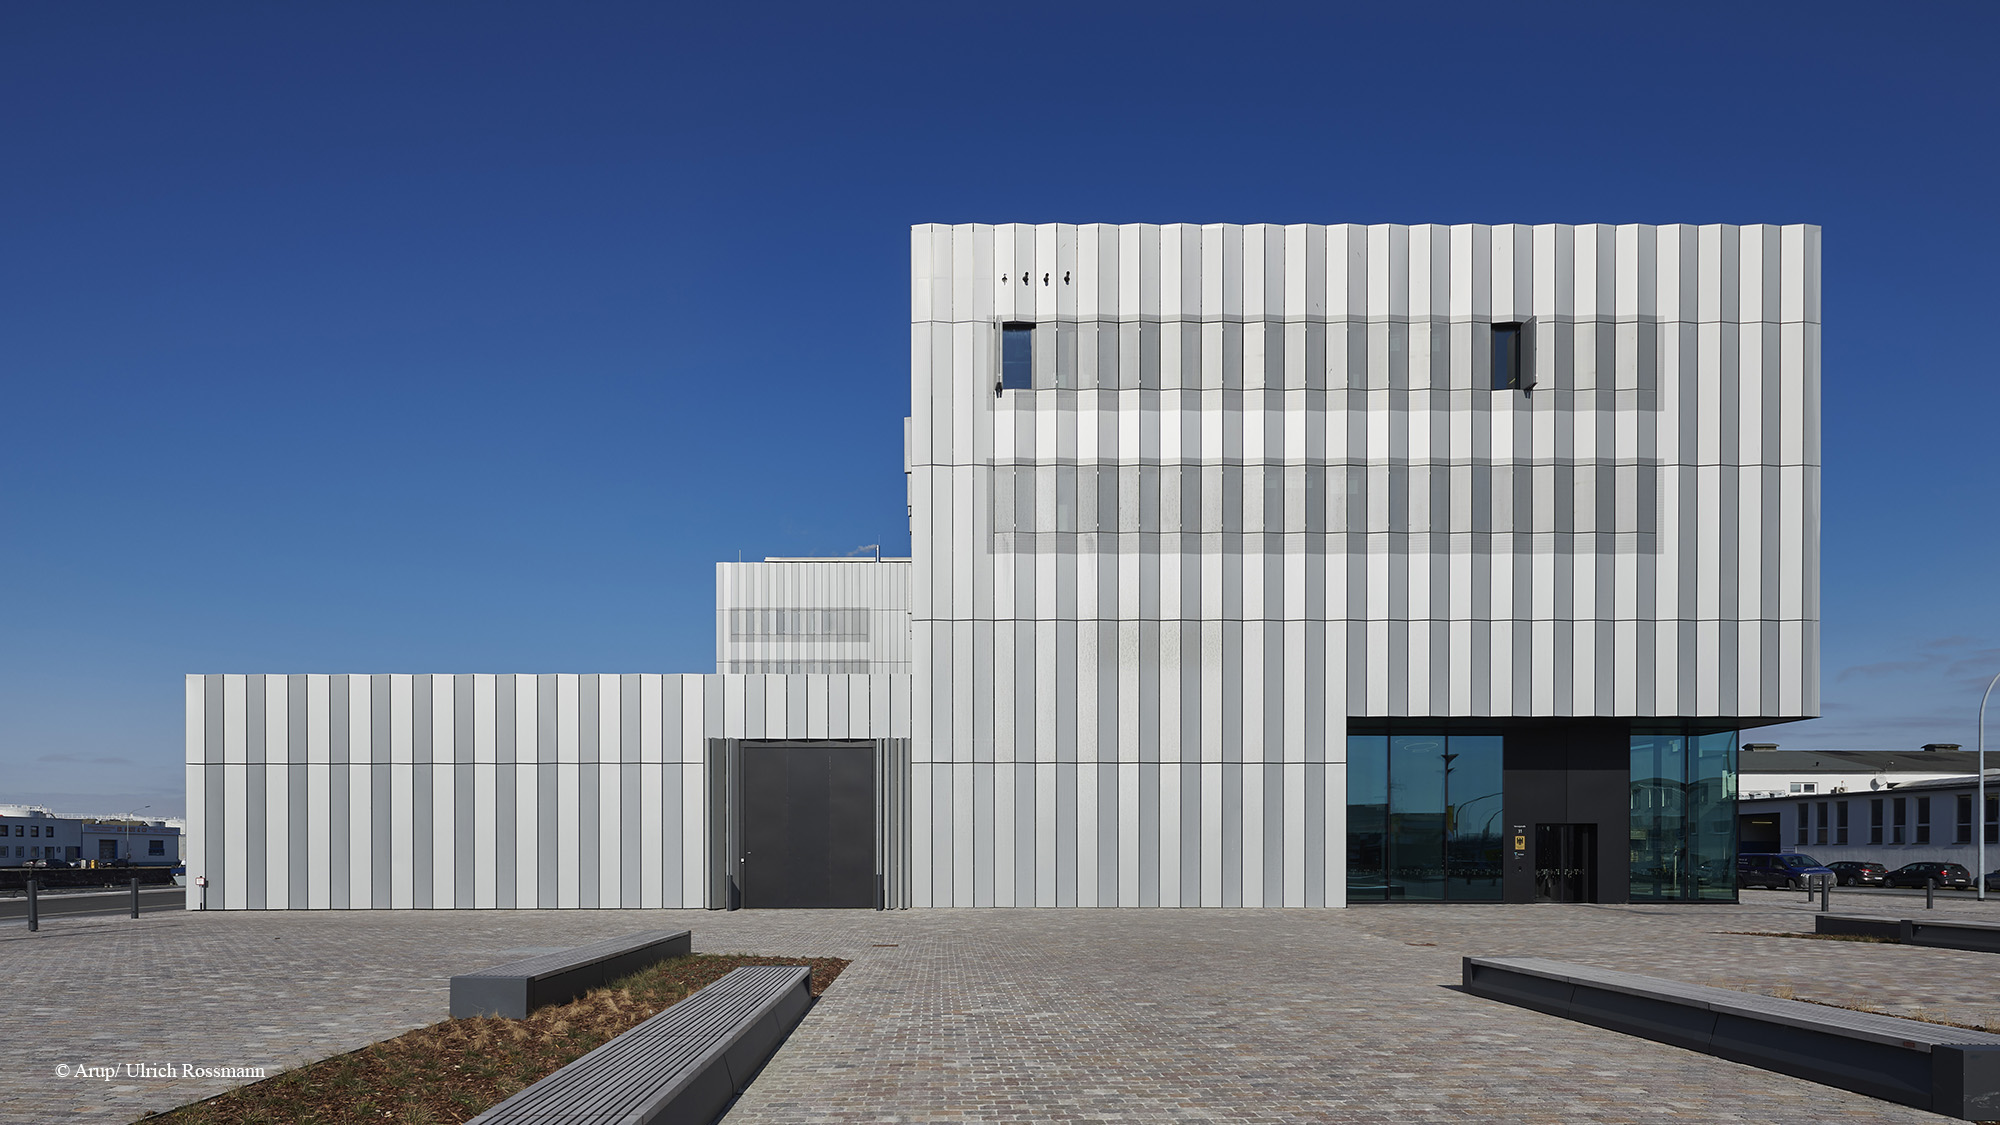 The cubic forms of the Thünen-Institut with its lightly folded, silver anodised aluminium facades are reminiscent of irregularly stacked containers.